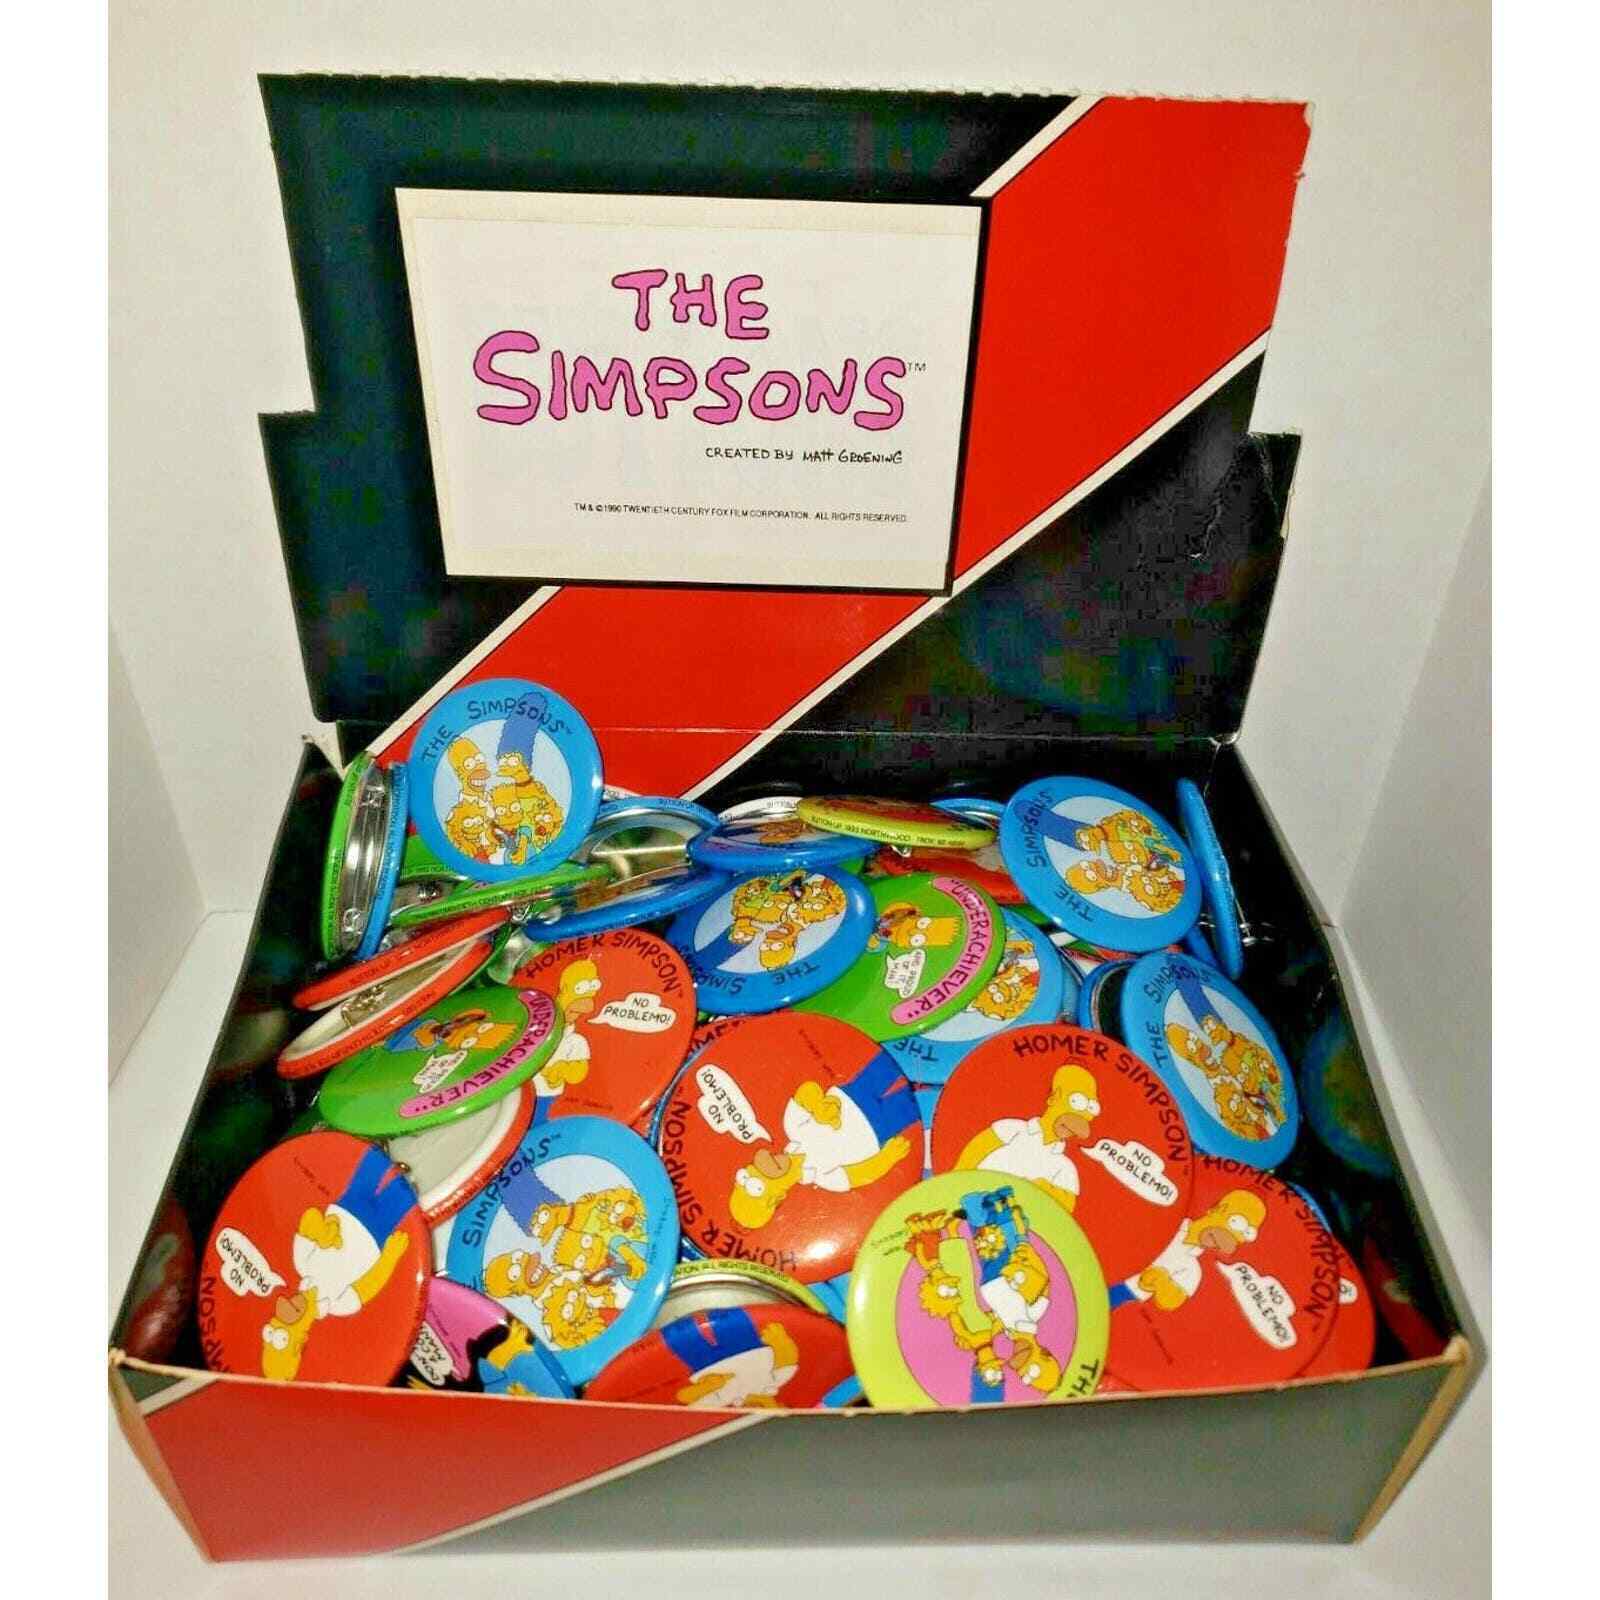 Vintage The Simpsons 120 Simpsons Pins Pinback Button Store Display NOS